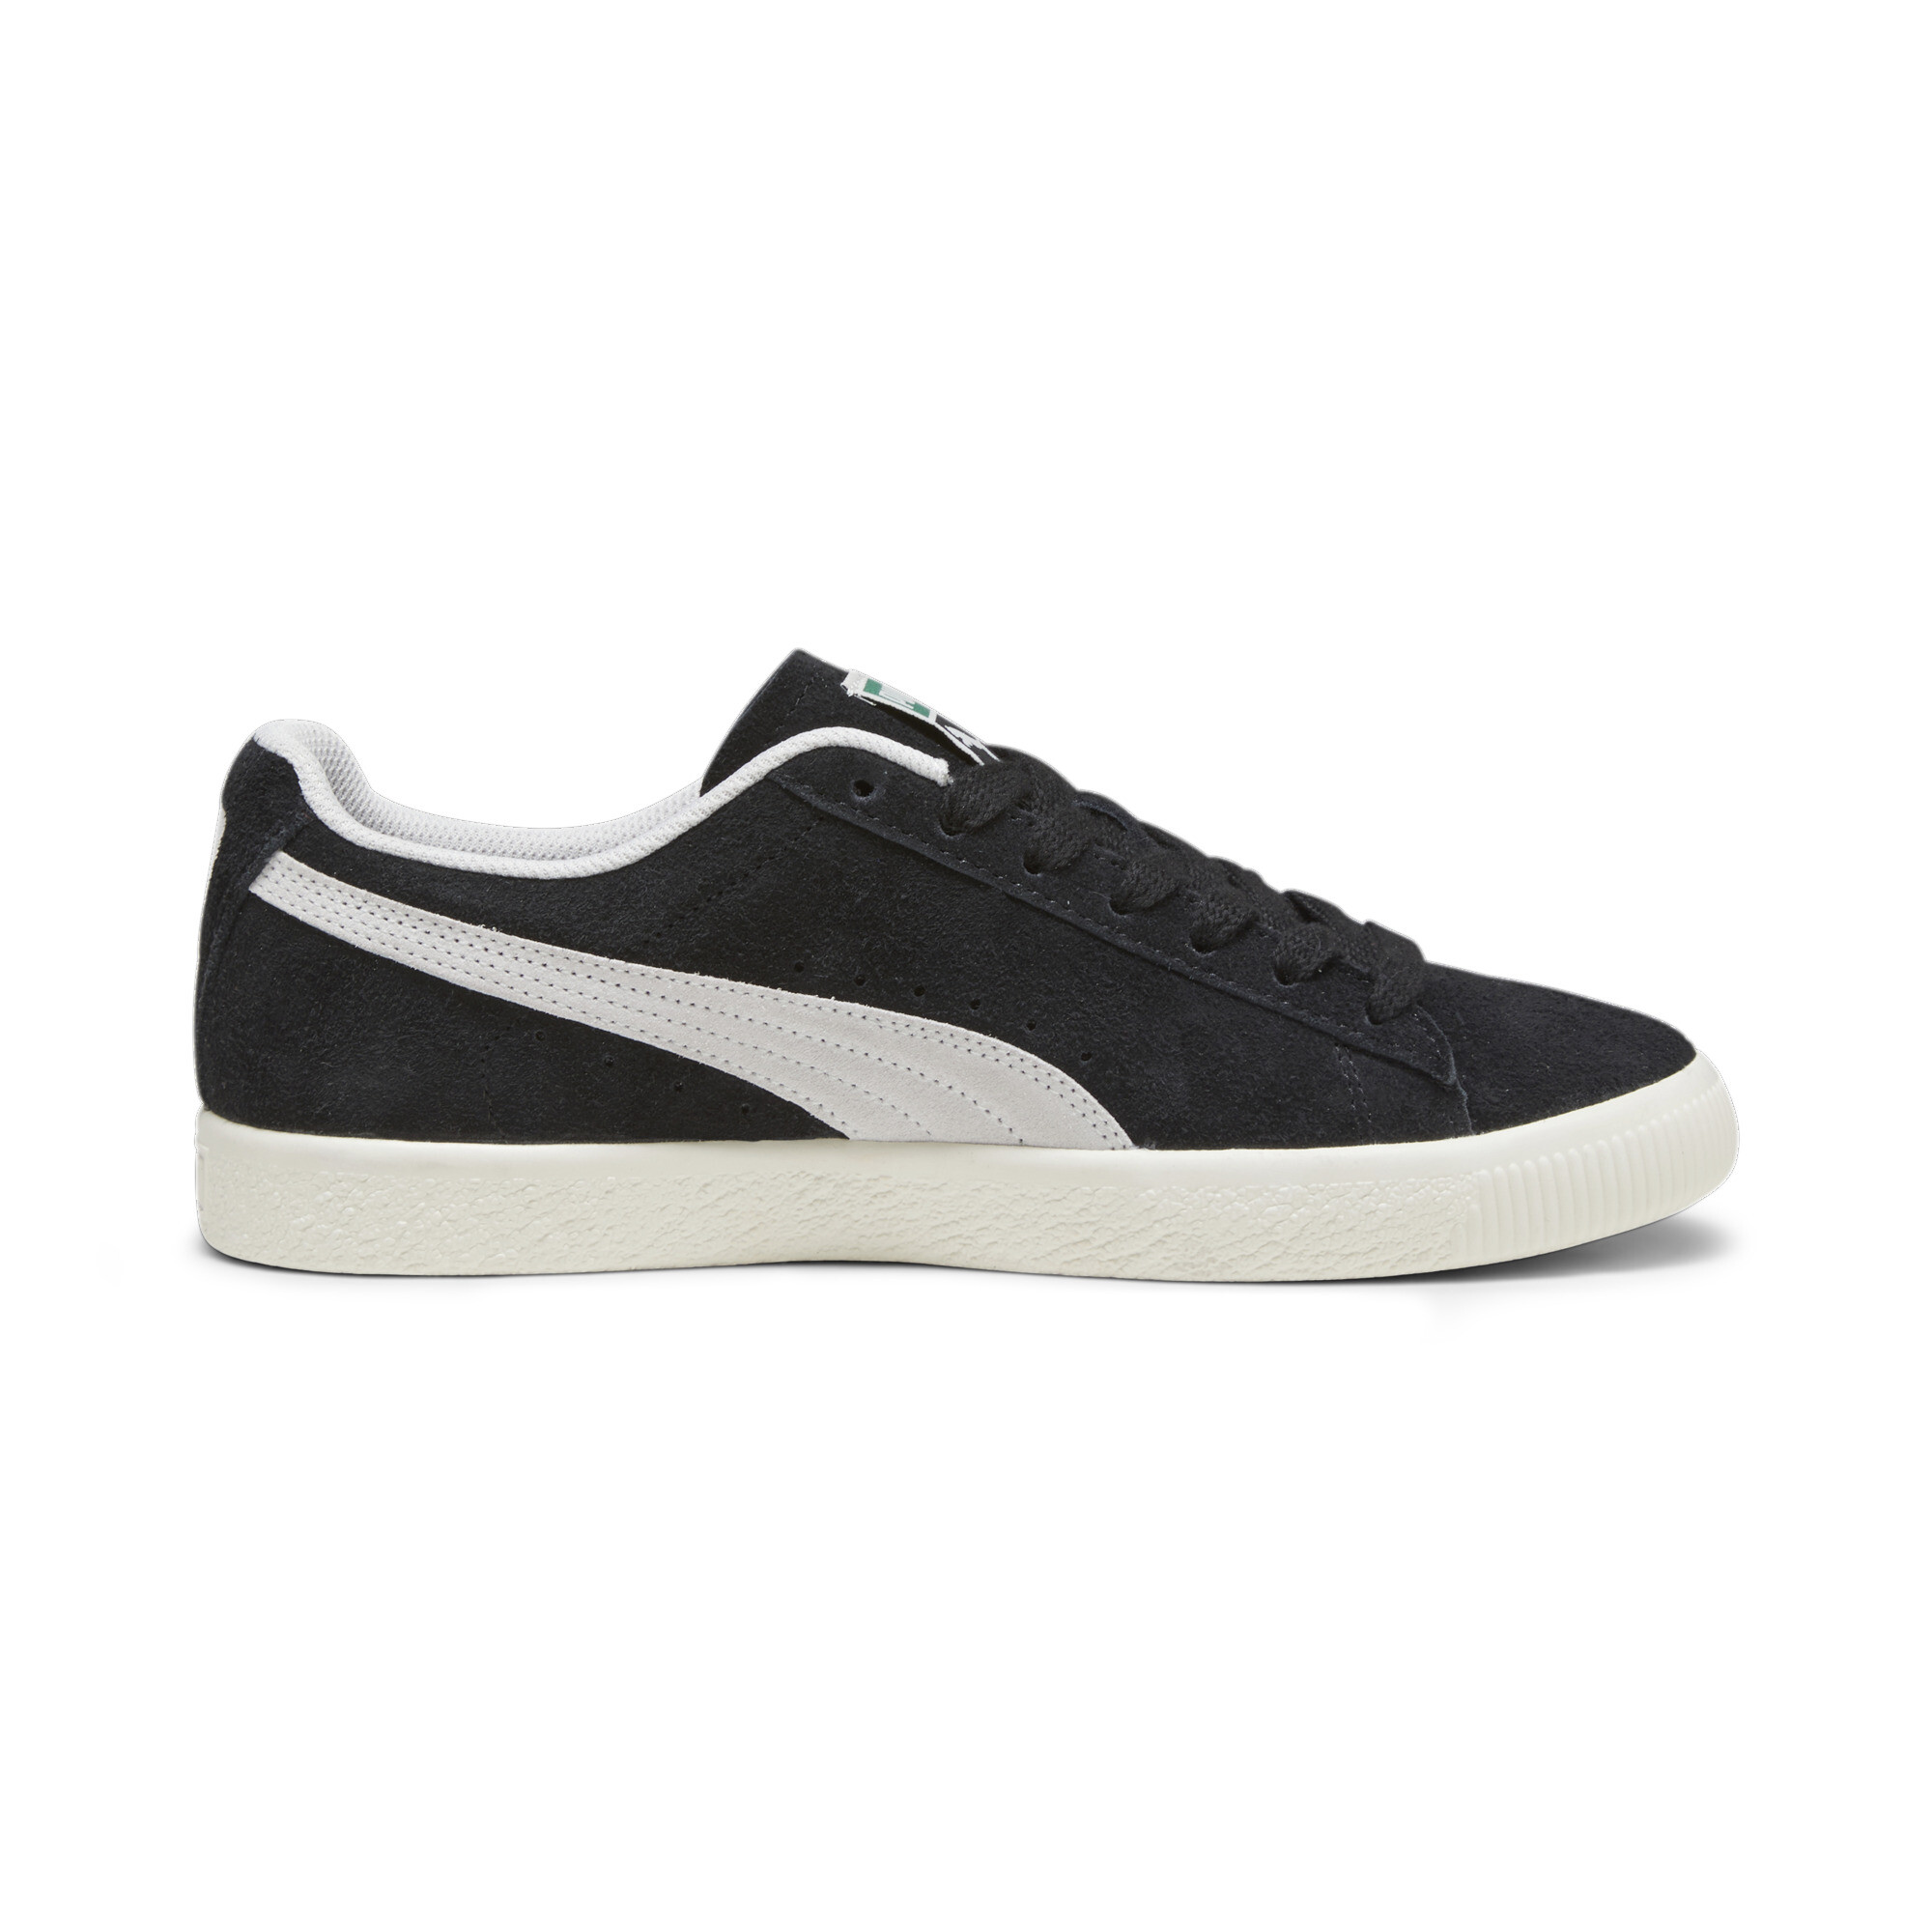 Men's PUMA Clyde Hairy Suede Sneakers In Black, Size EU 42